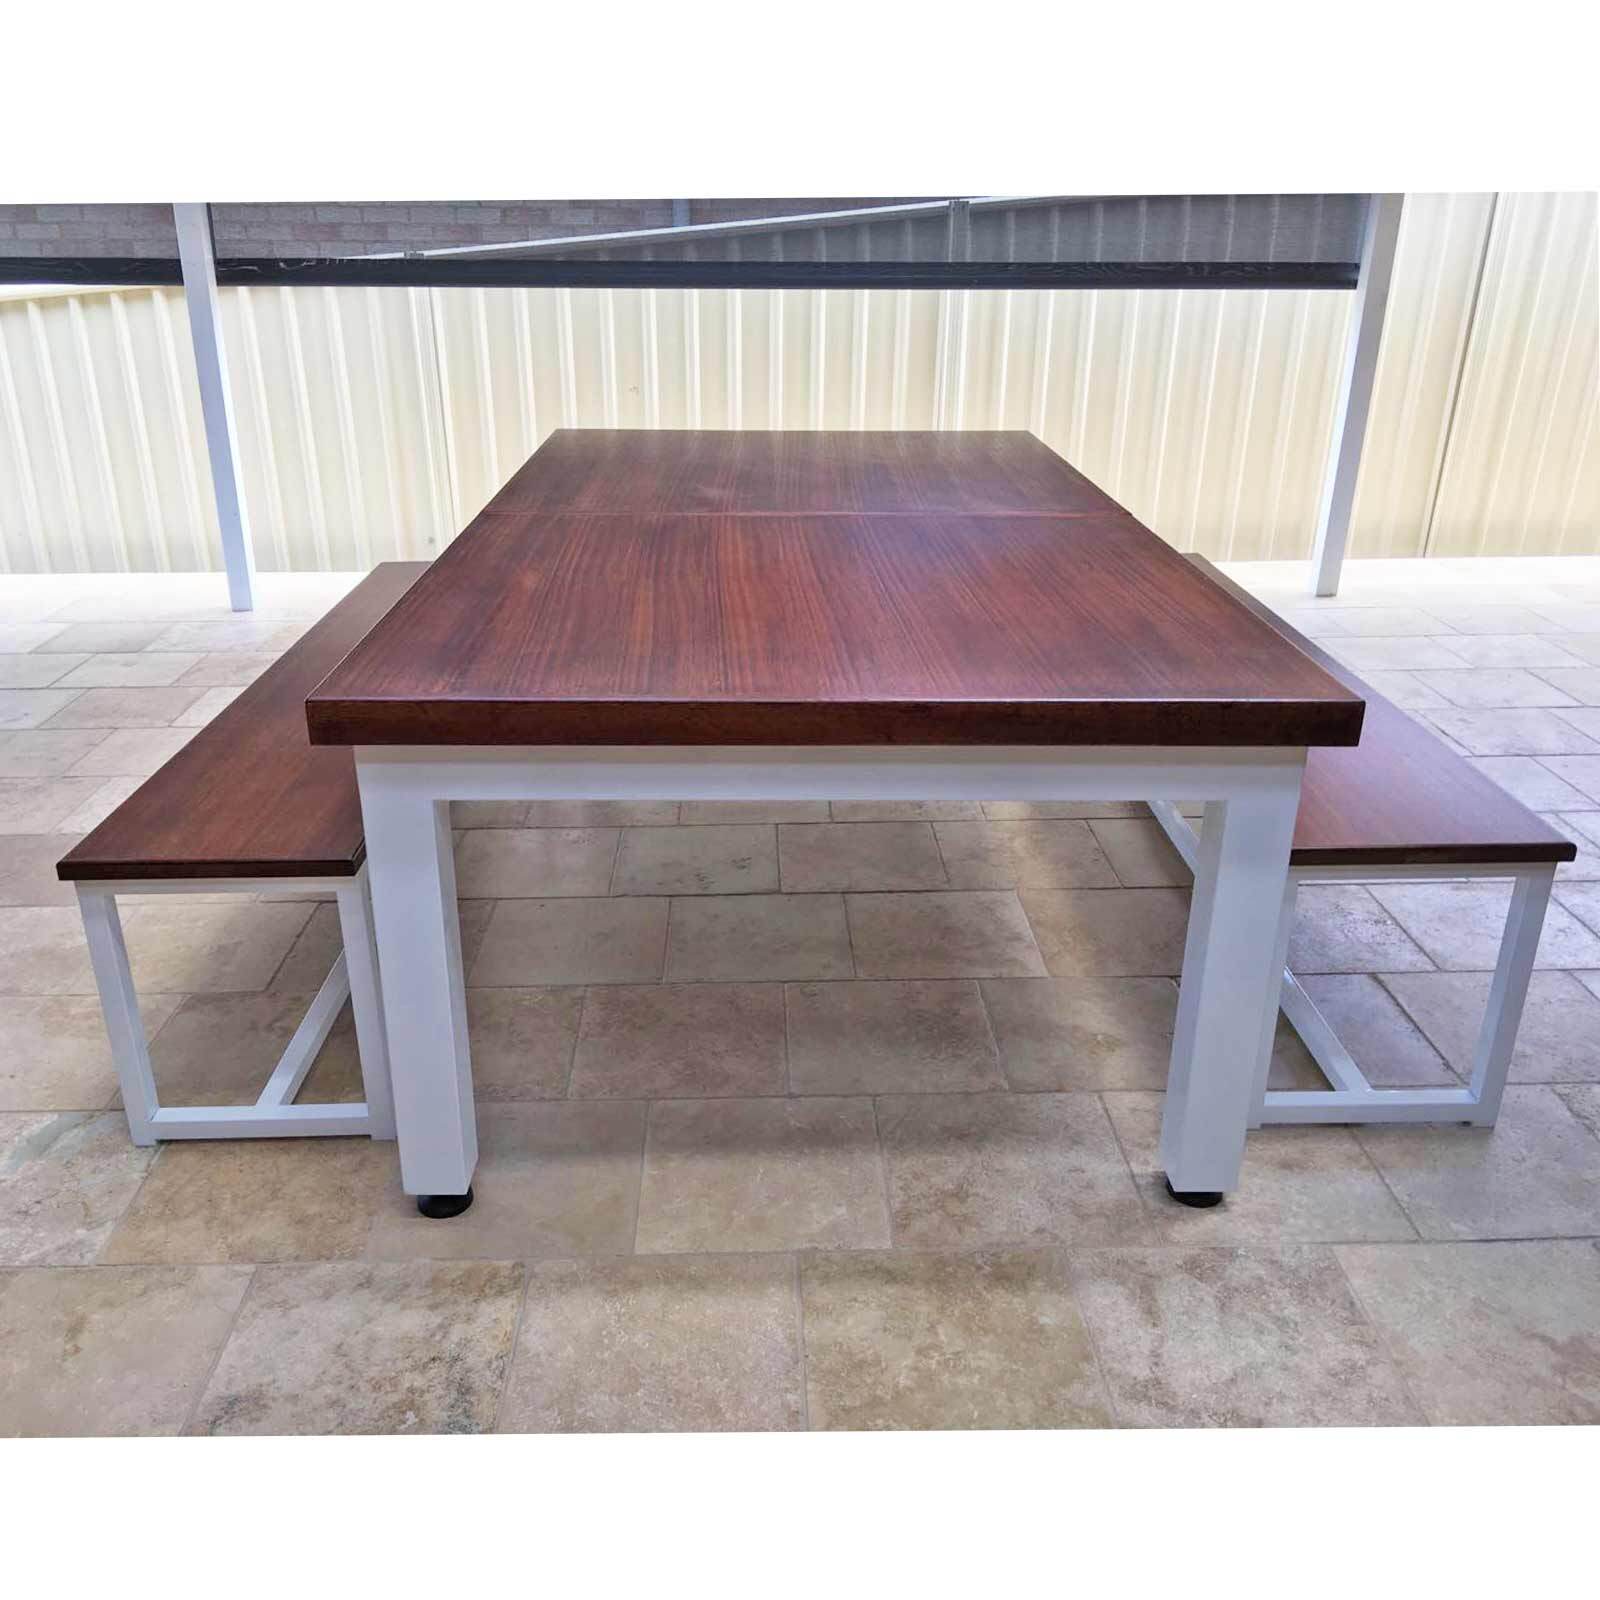 Bench Seat, Tassie Oak Timber Top and Metal Frame